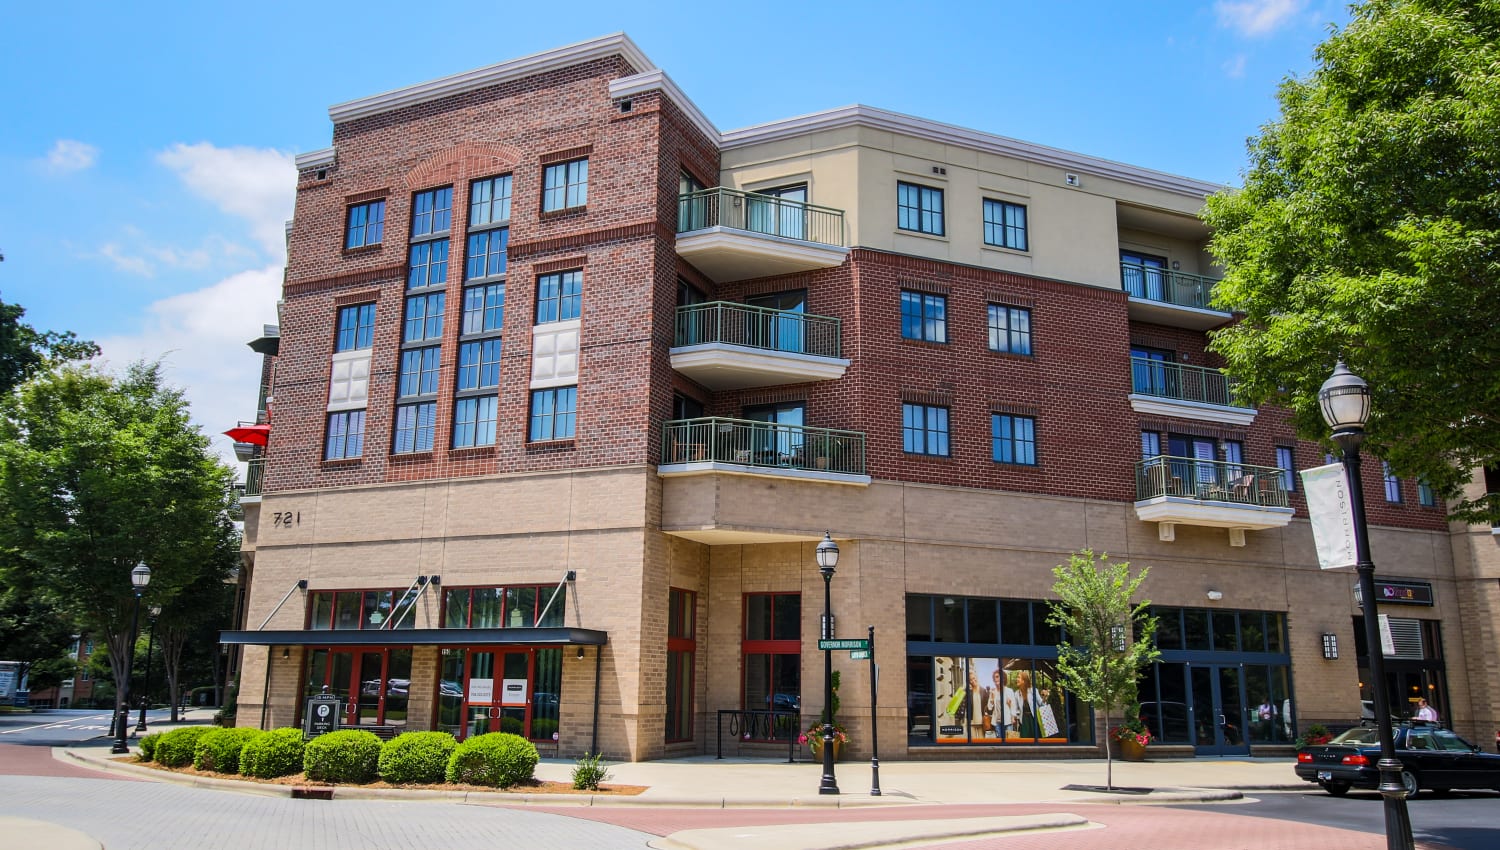 Exterior with private balconies visible at SouthPark Morrison in Charlotte, North Carolina